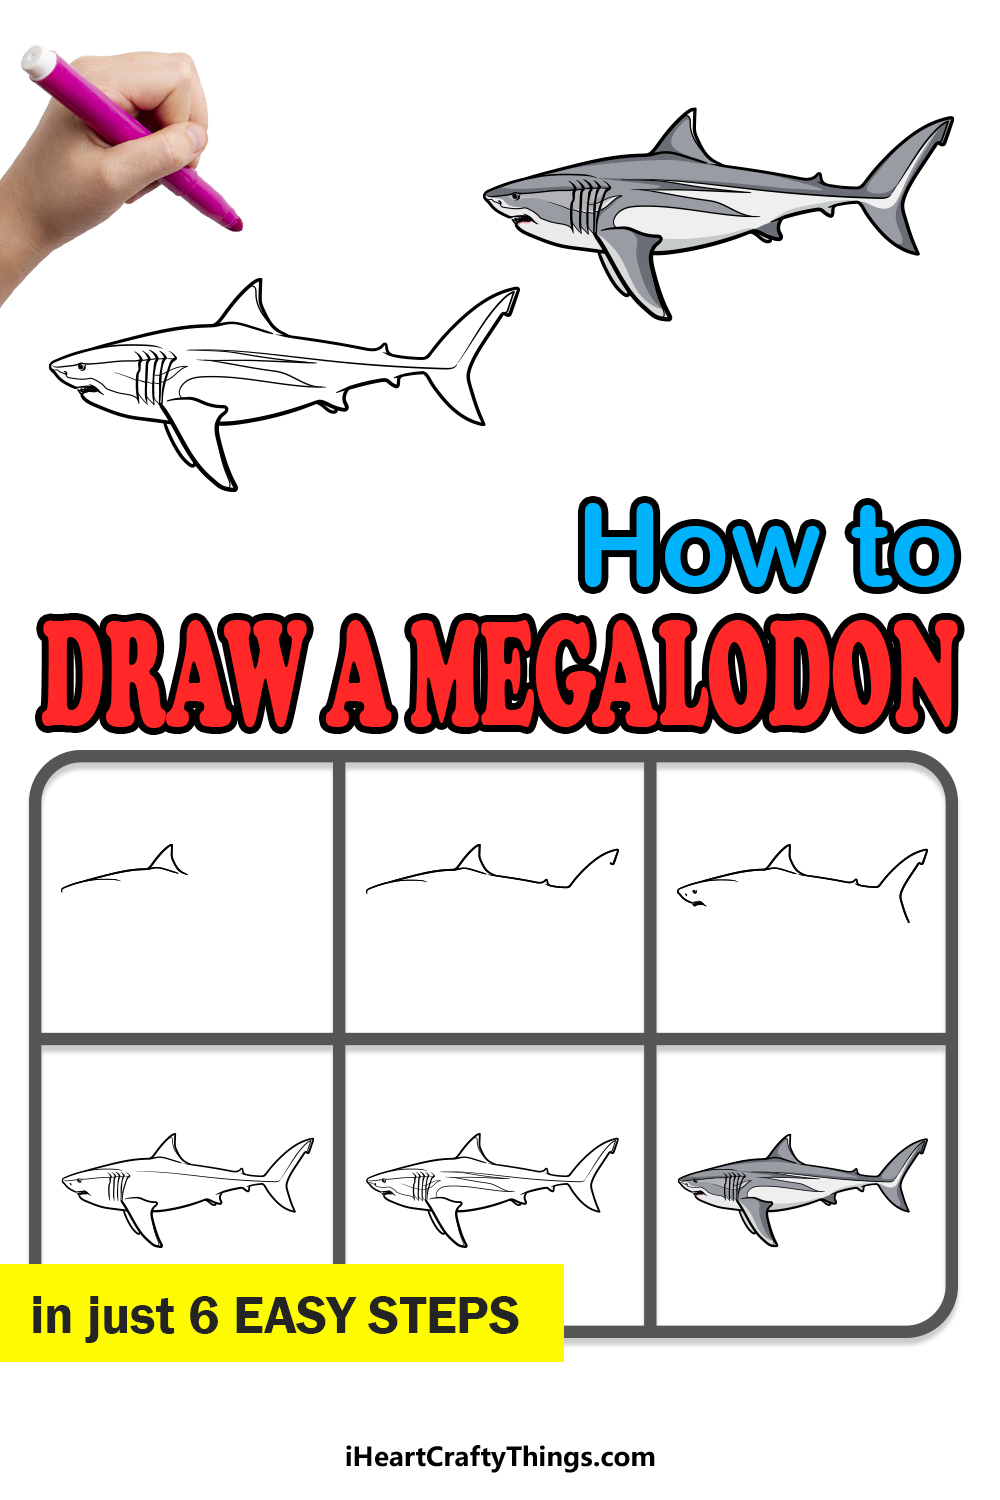 Megalodon Drawing - How To Draw A Megalodon Step By Step